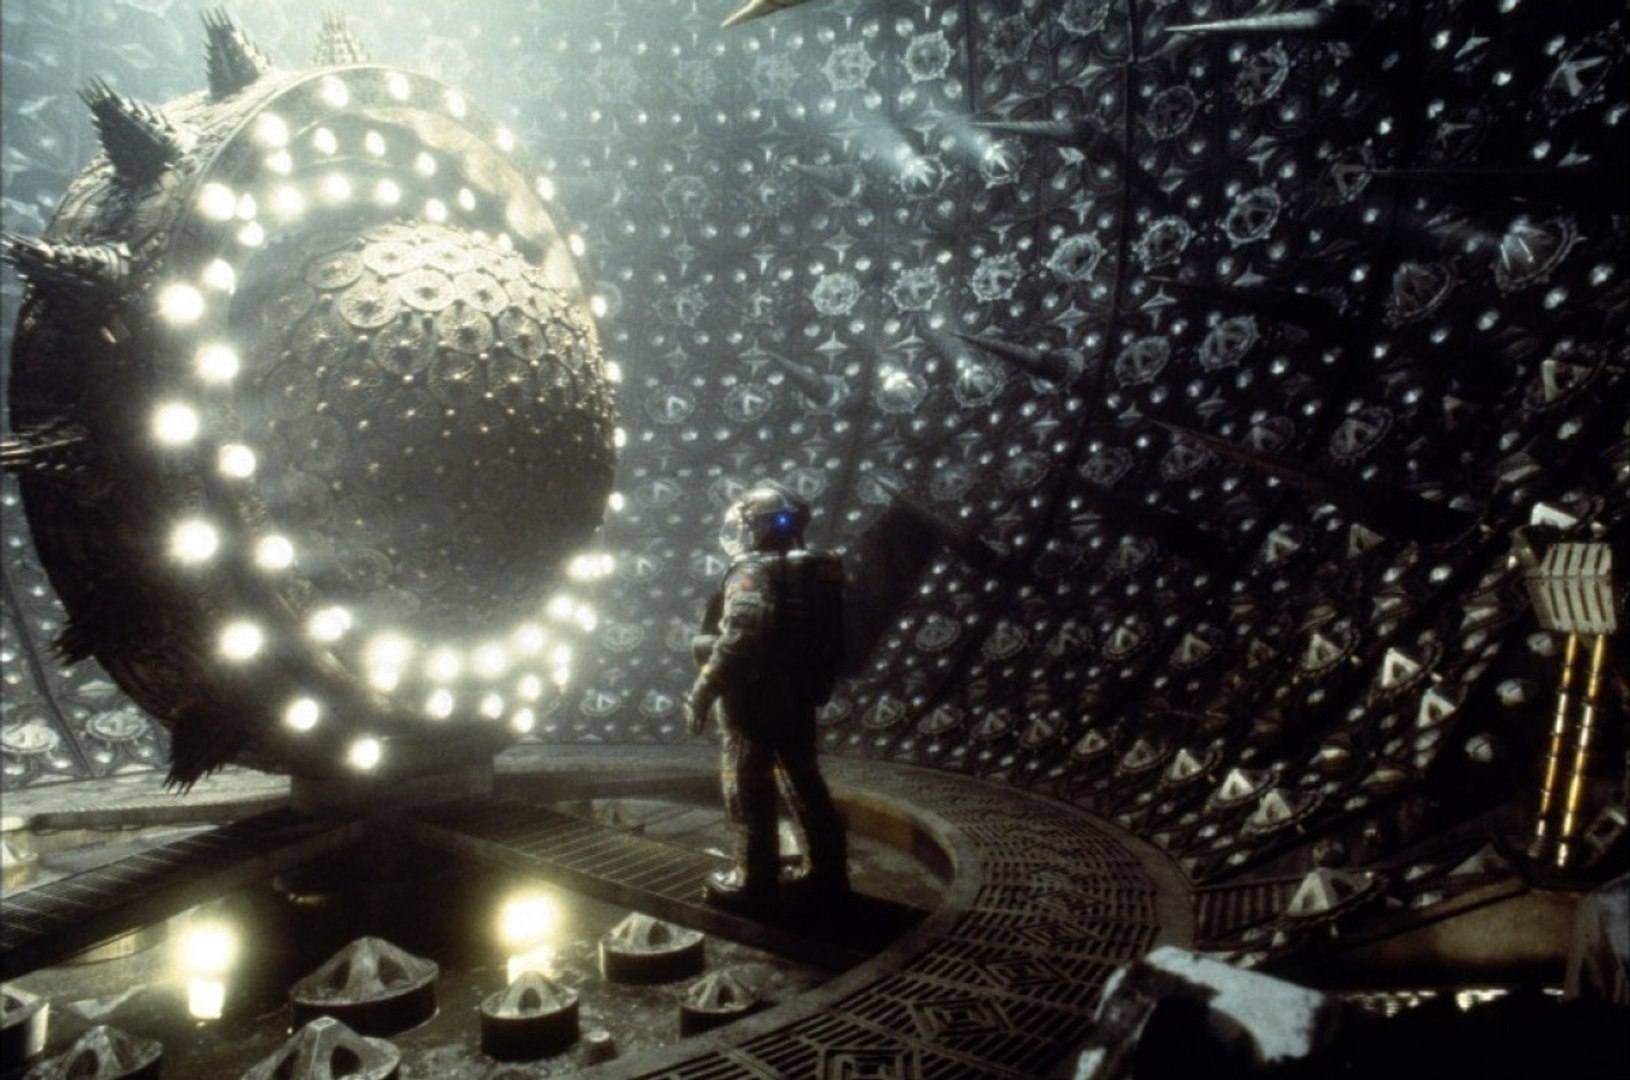 A scene from "Event Horizon".